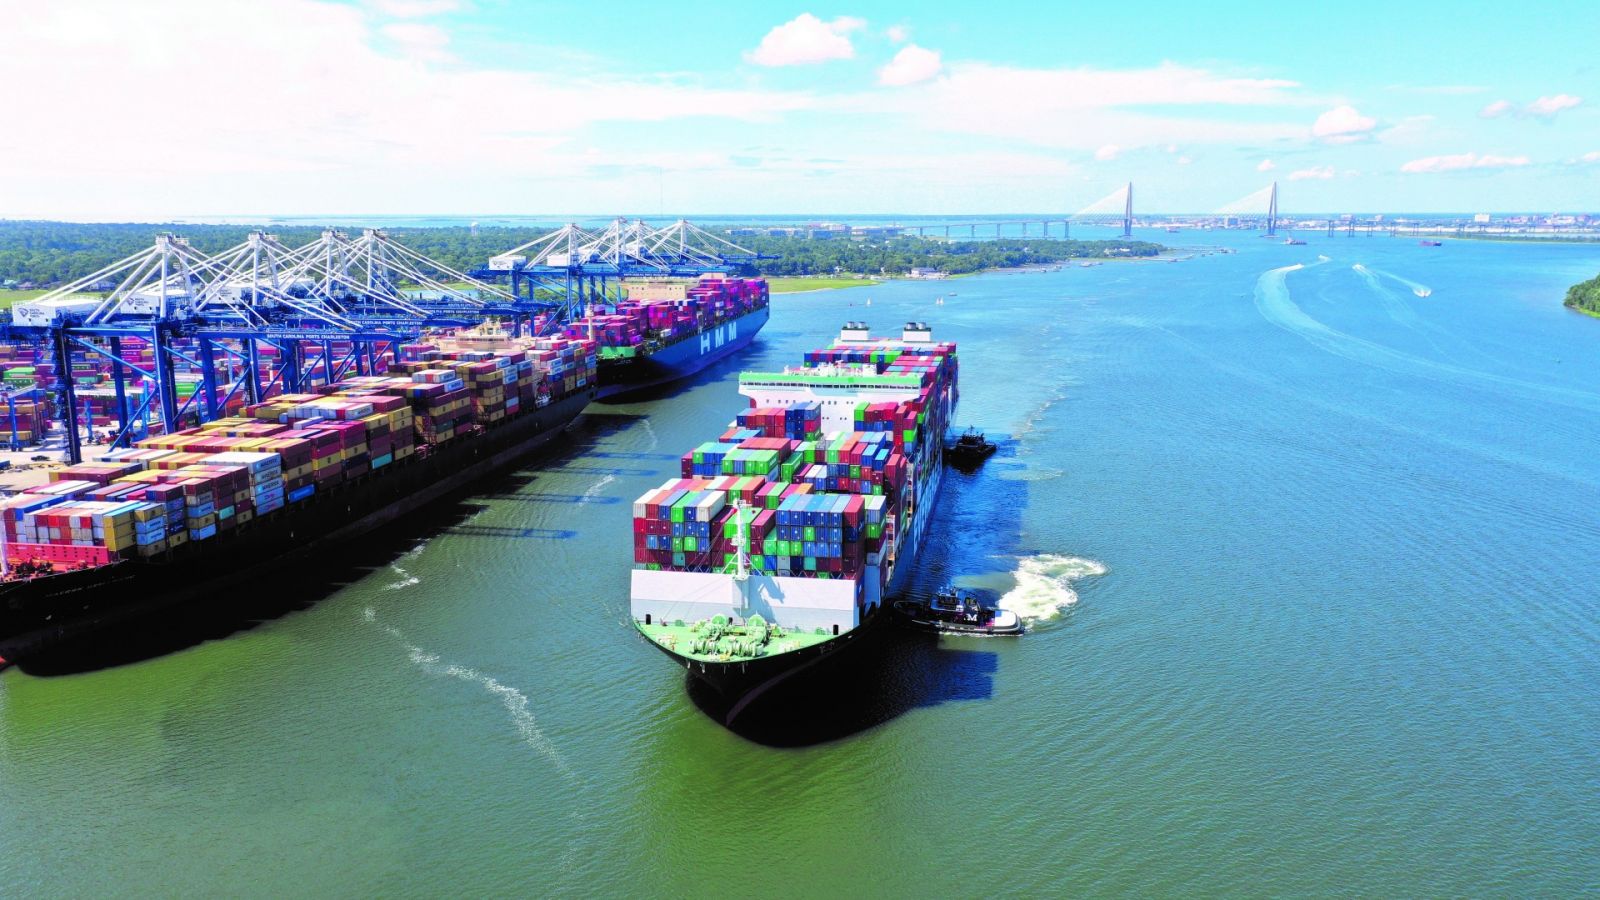 South Carolina exported $29.7 billion in goods in 2021 and led the nation in exports of tires and completed passenger motor vehicles, according to the state commerce department. (Photo/SCPA/Walter Lagarenne)